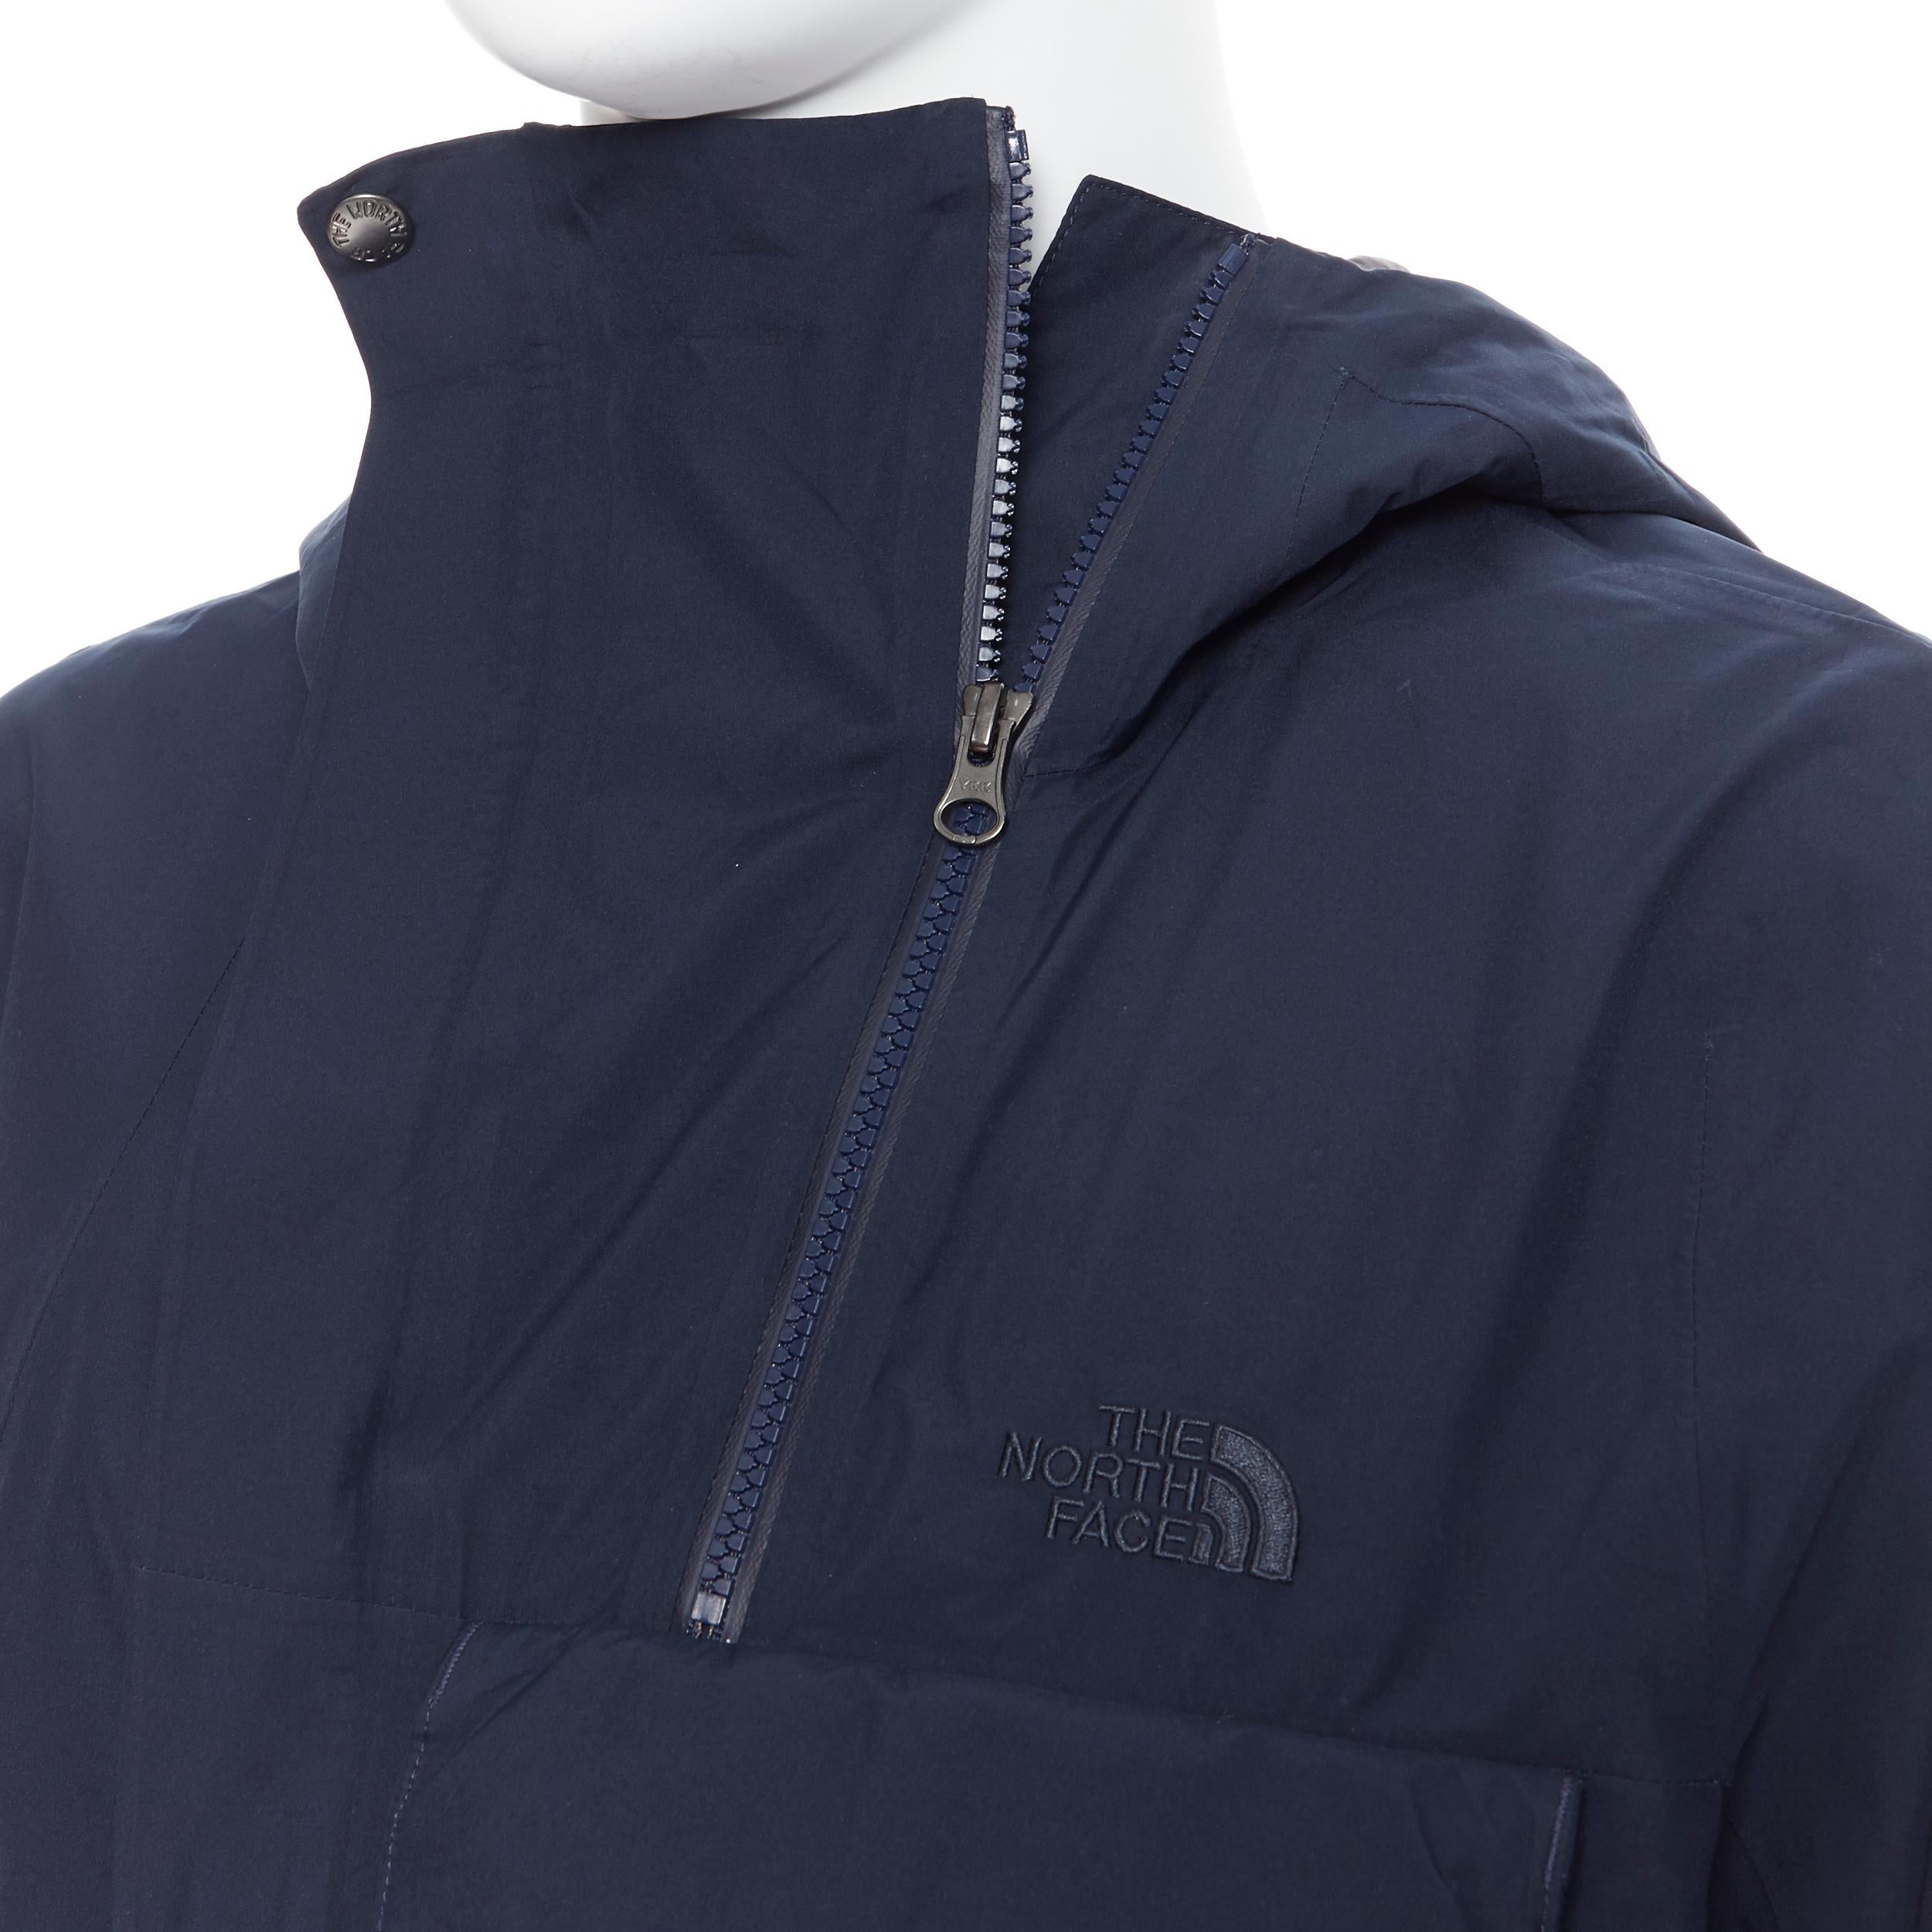 THE NORTH FACE GORE TEX blue asymmetric zip patch pocket hood windbreaker M / L For Sale 1